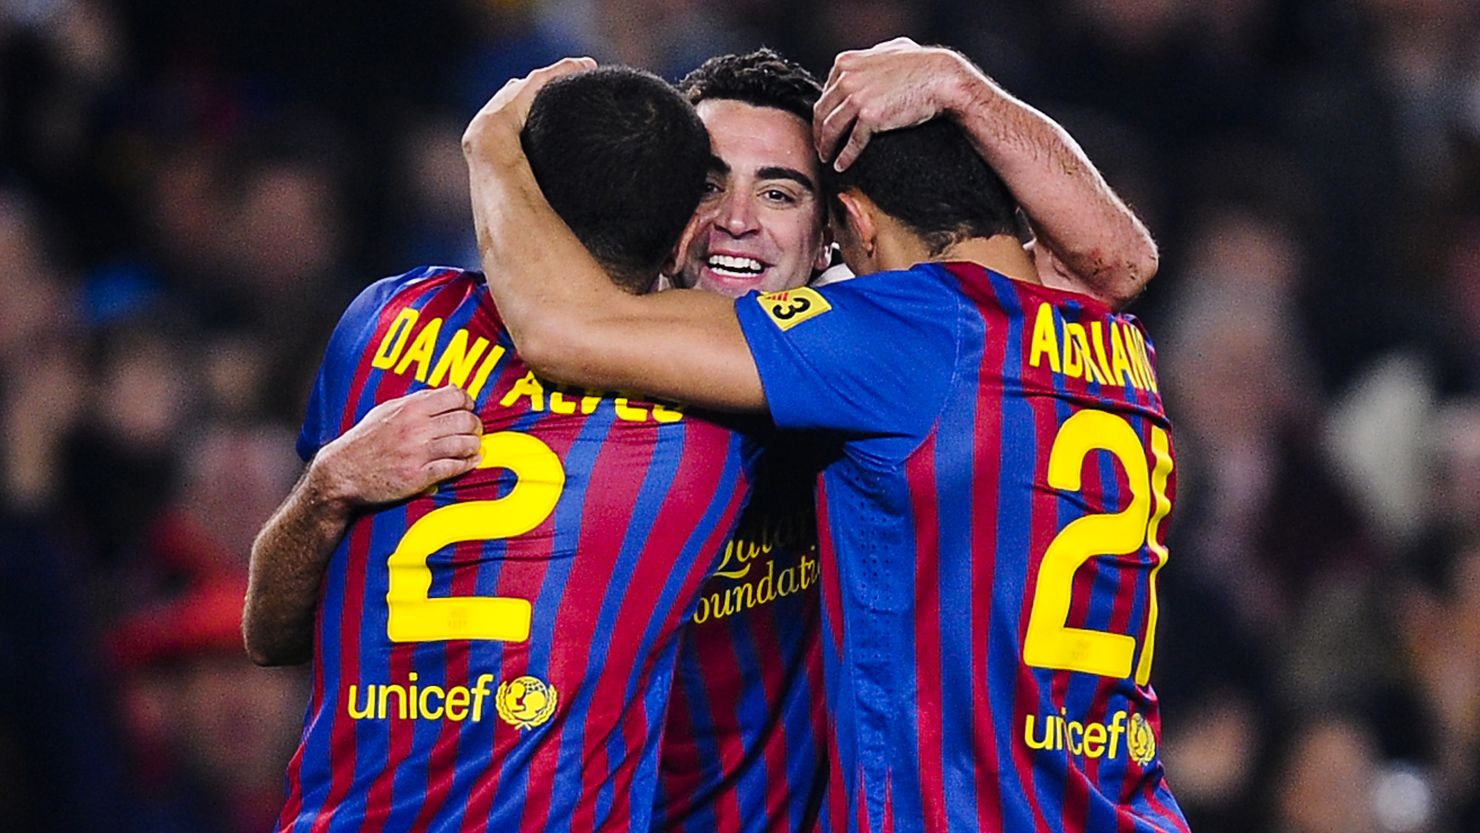 Xavi (center) celebrates with Dani Alves and Adriano as Barcelona beat Sporting Gijon 3-1 at the Nou Camp.